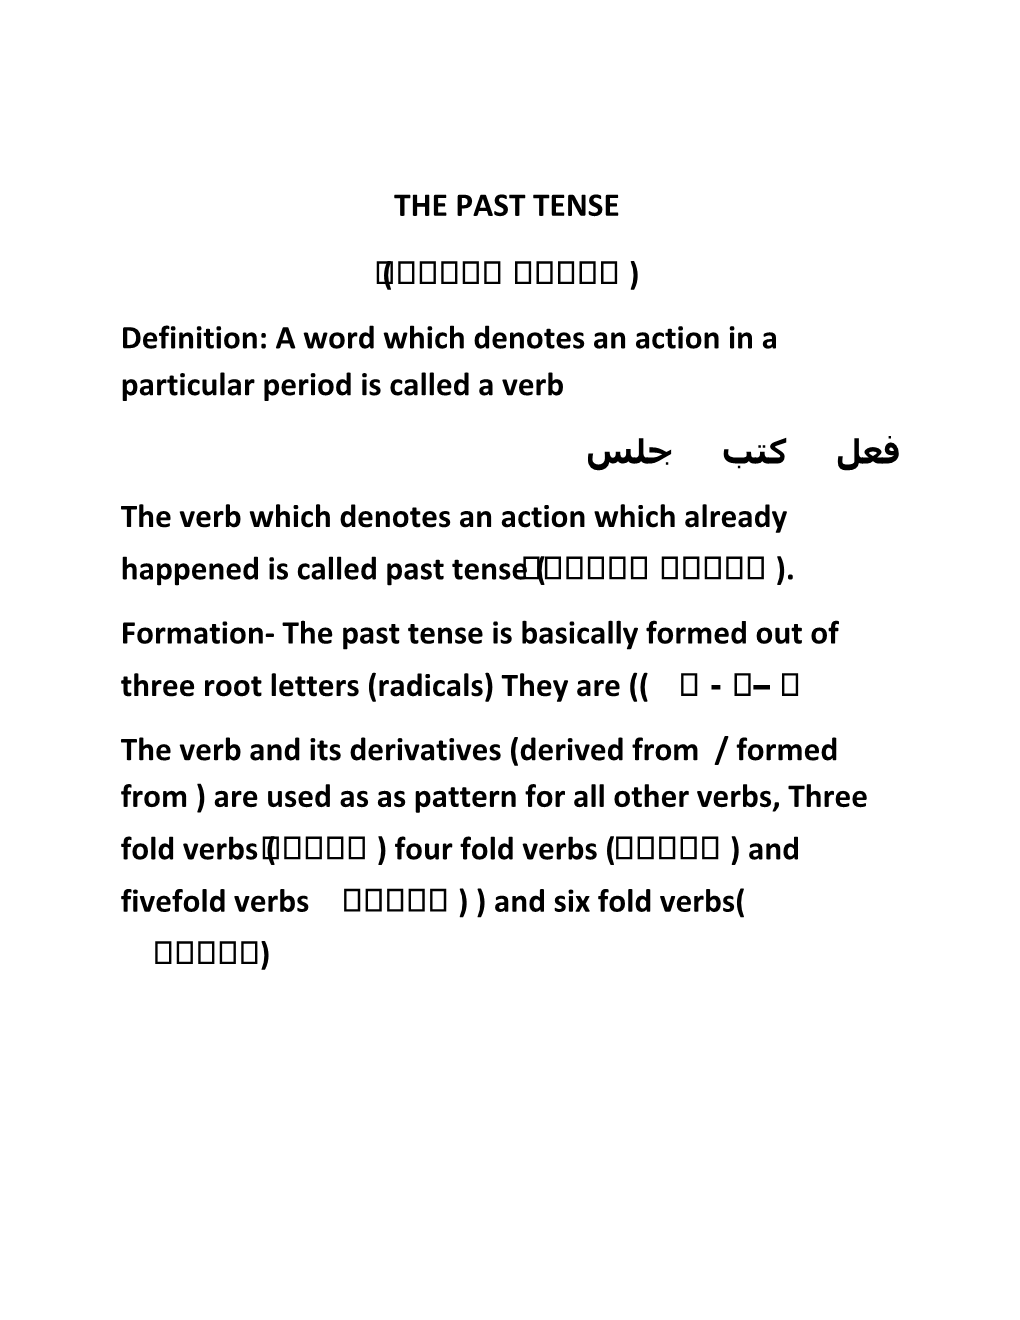 Definition: a Word Which Denotes an Action in a Particular Period Is Called a Verb